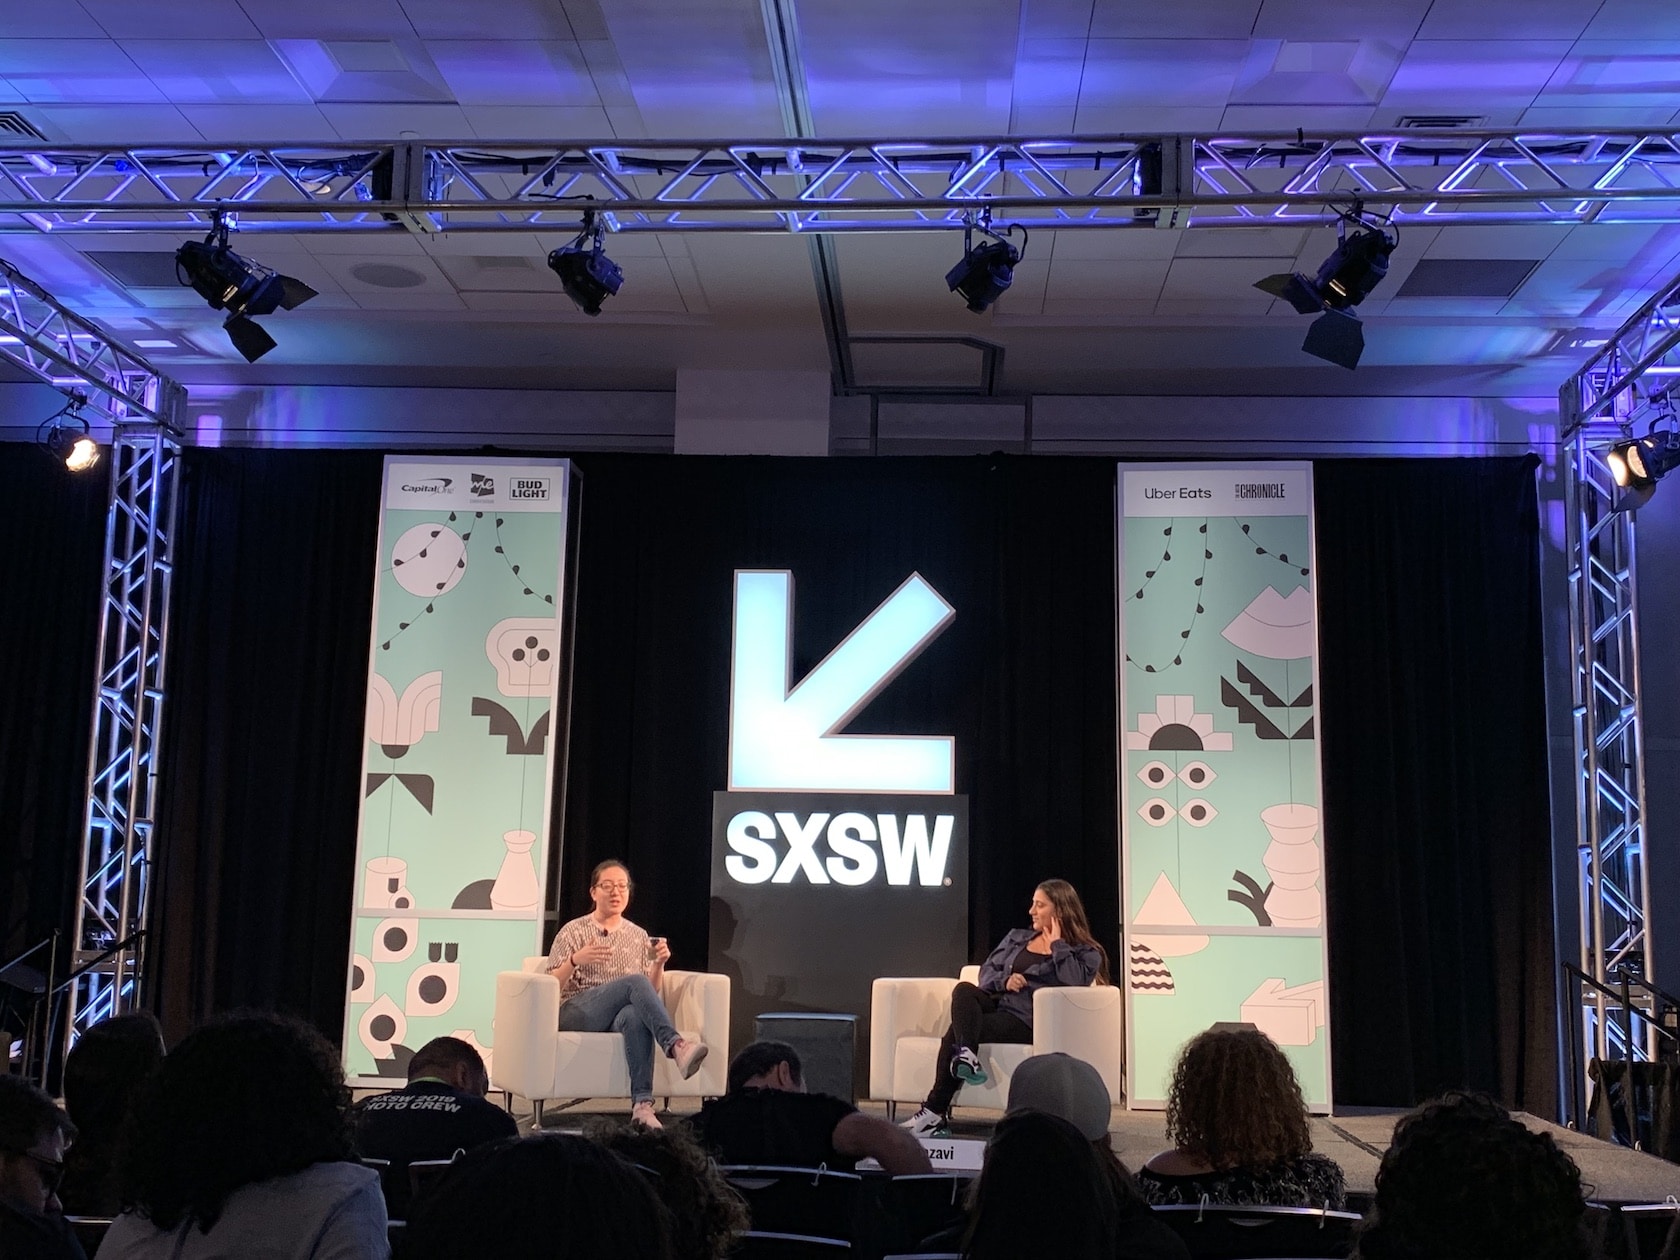 Here's 10 of the main take-aways for sports innovations we saw at SXSW 2019.